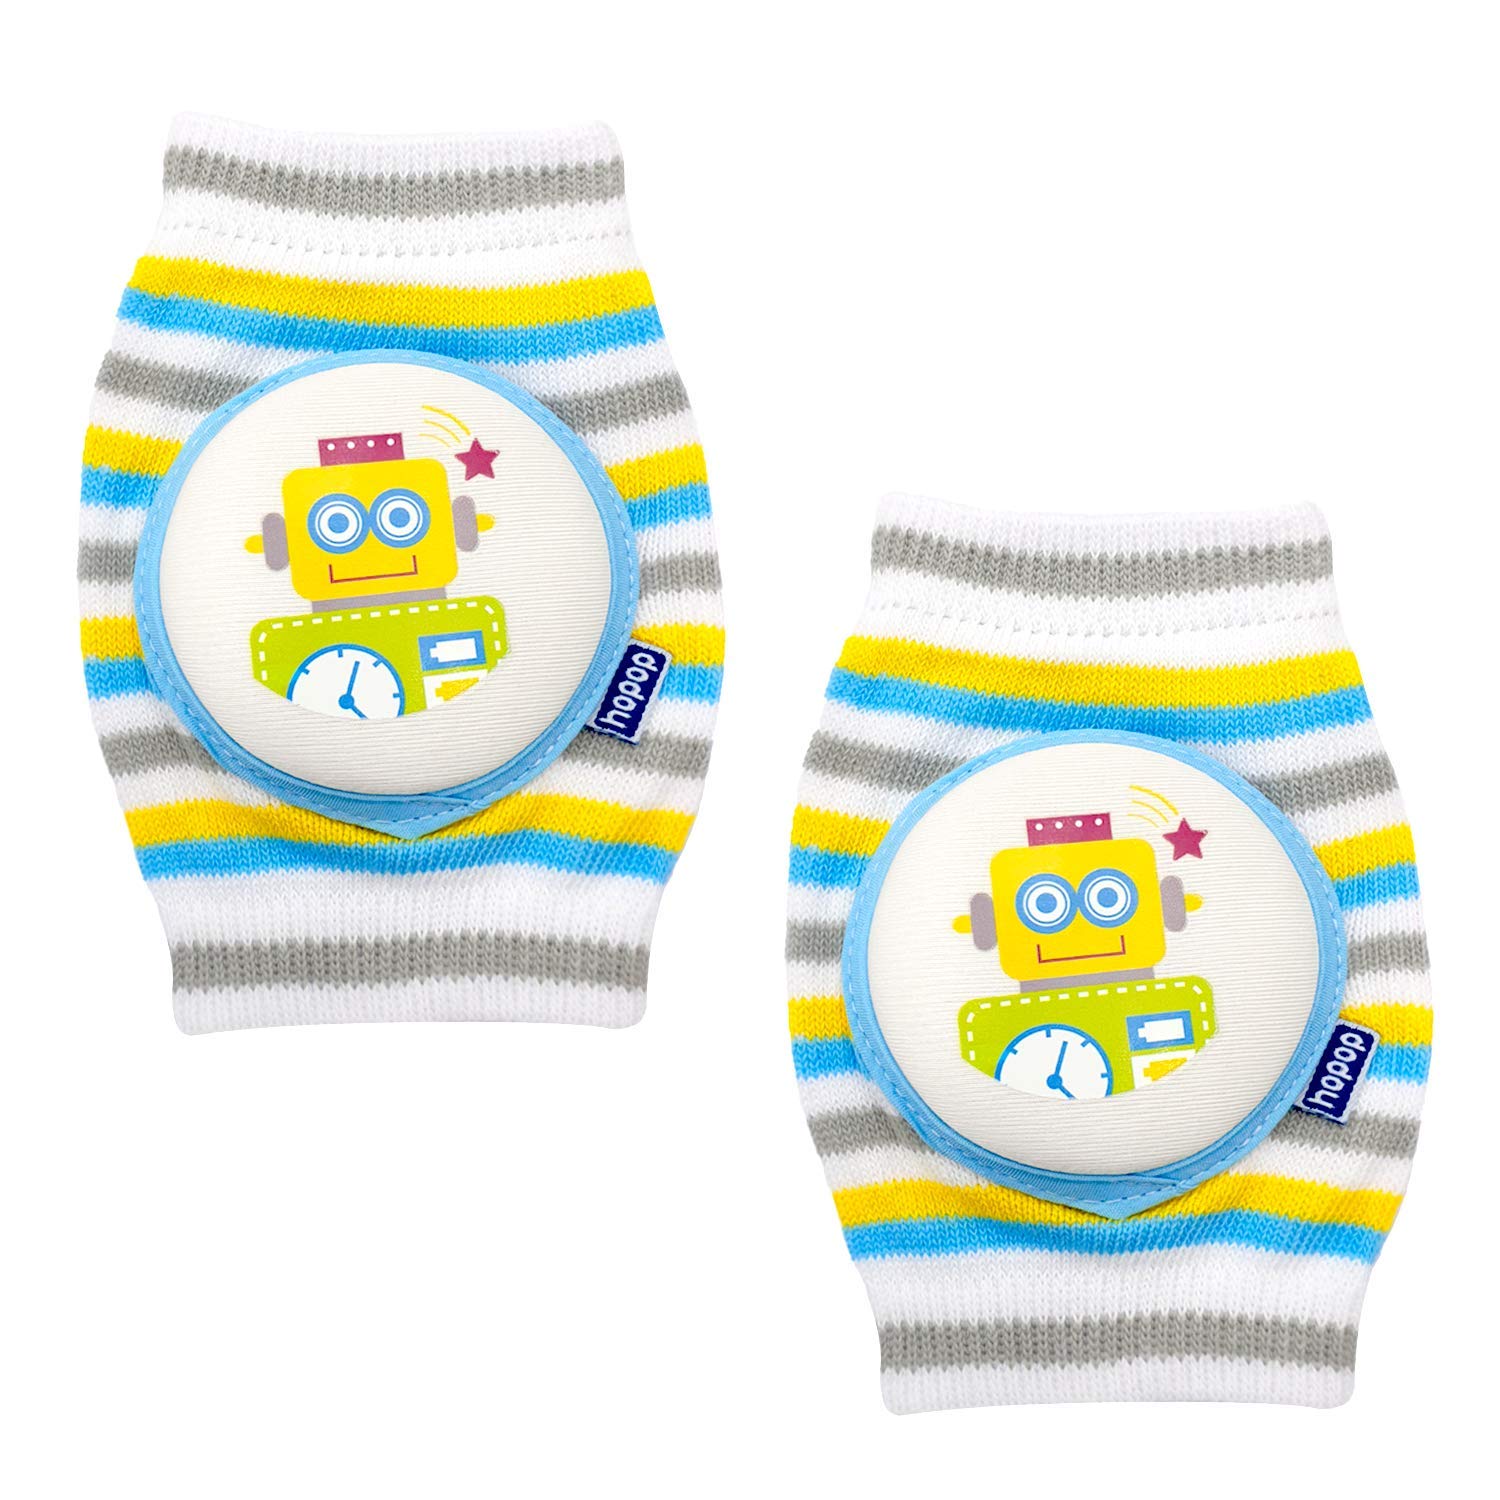 Hopop Elbow & Knee Pad for Baby - Yellow 6m+